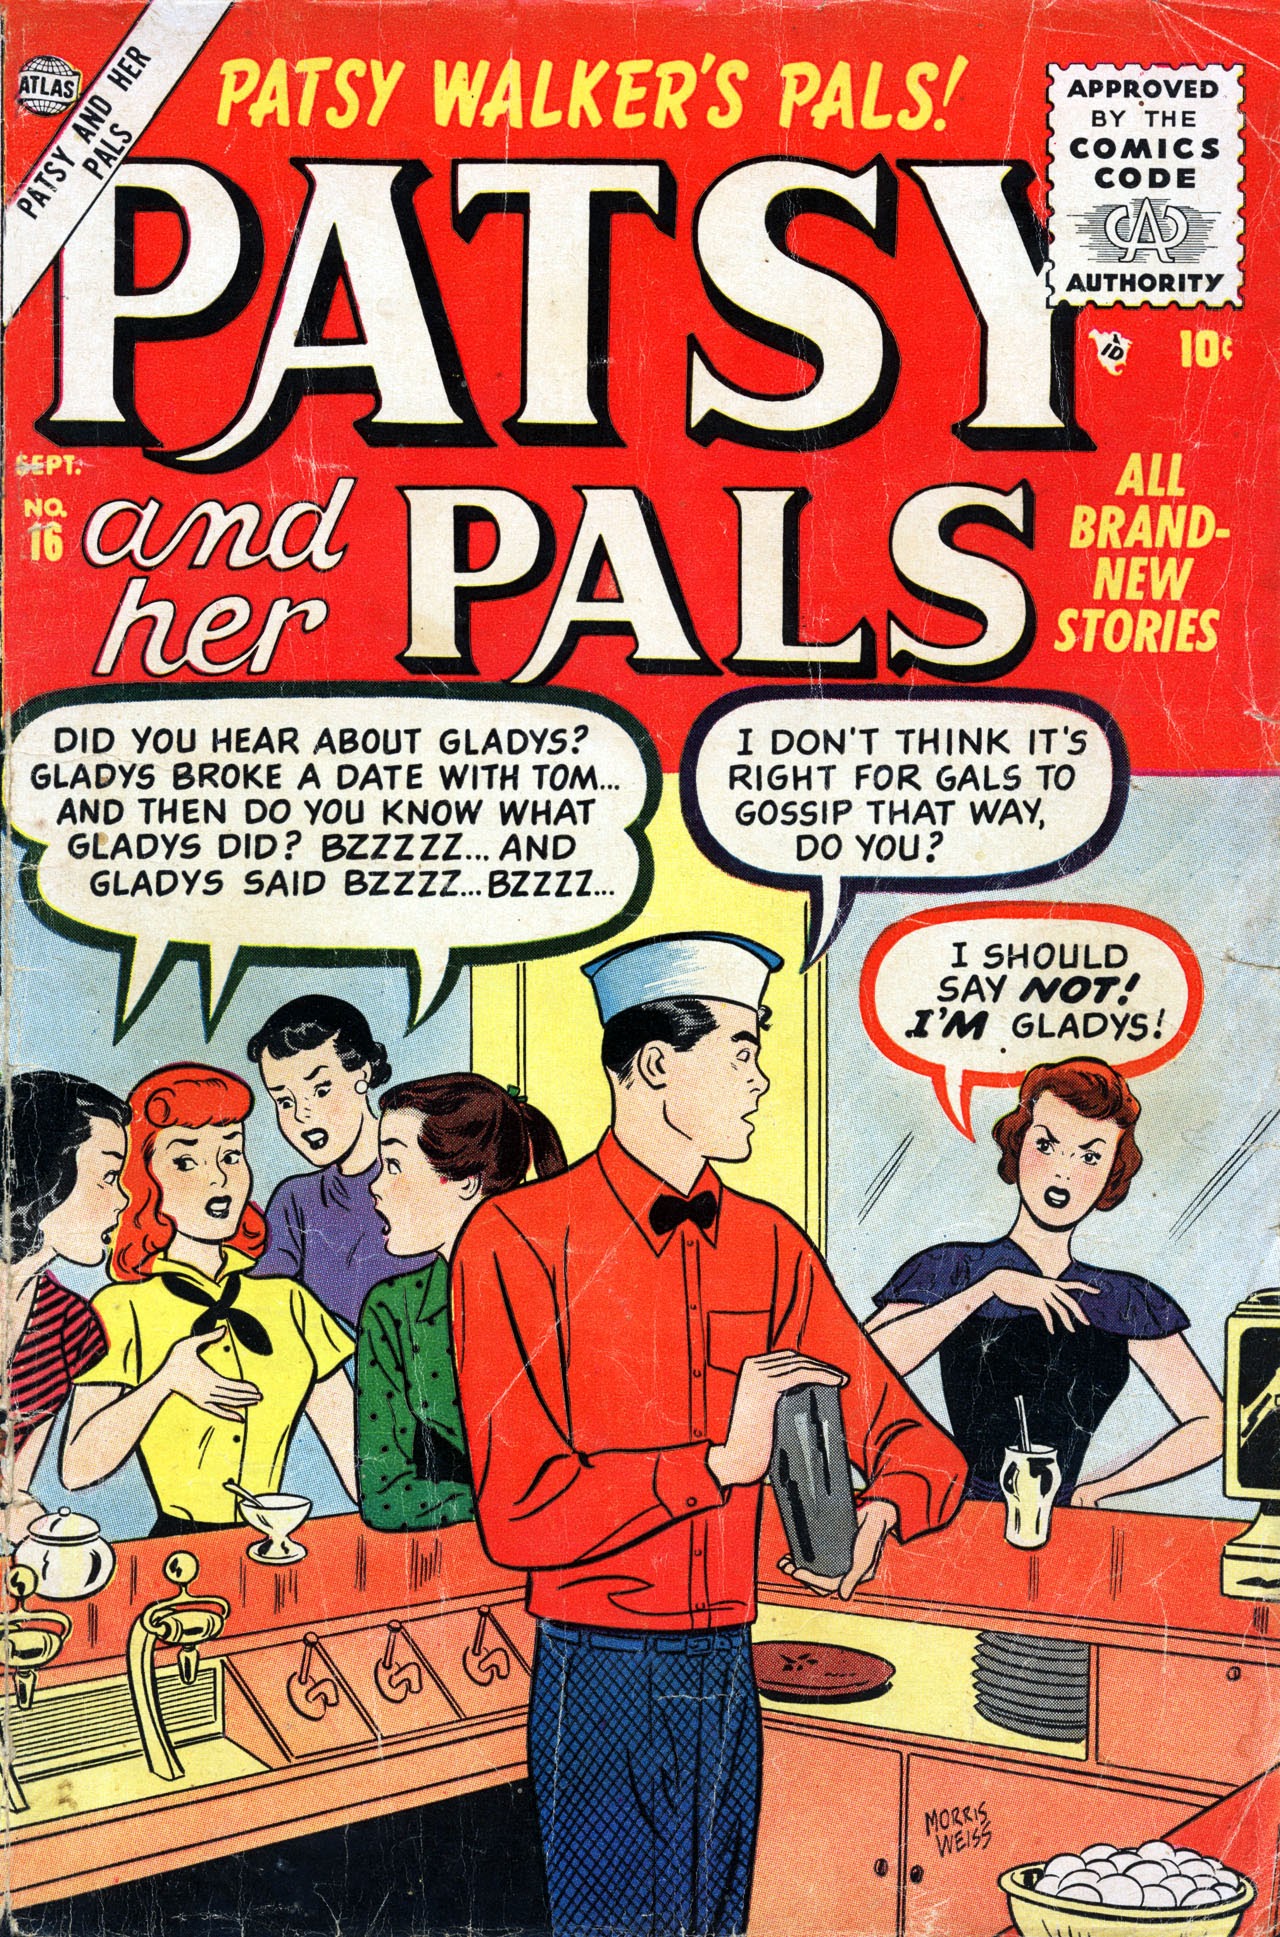 Read online Patsy and her Pals comic -  Issue #16 - 1